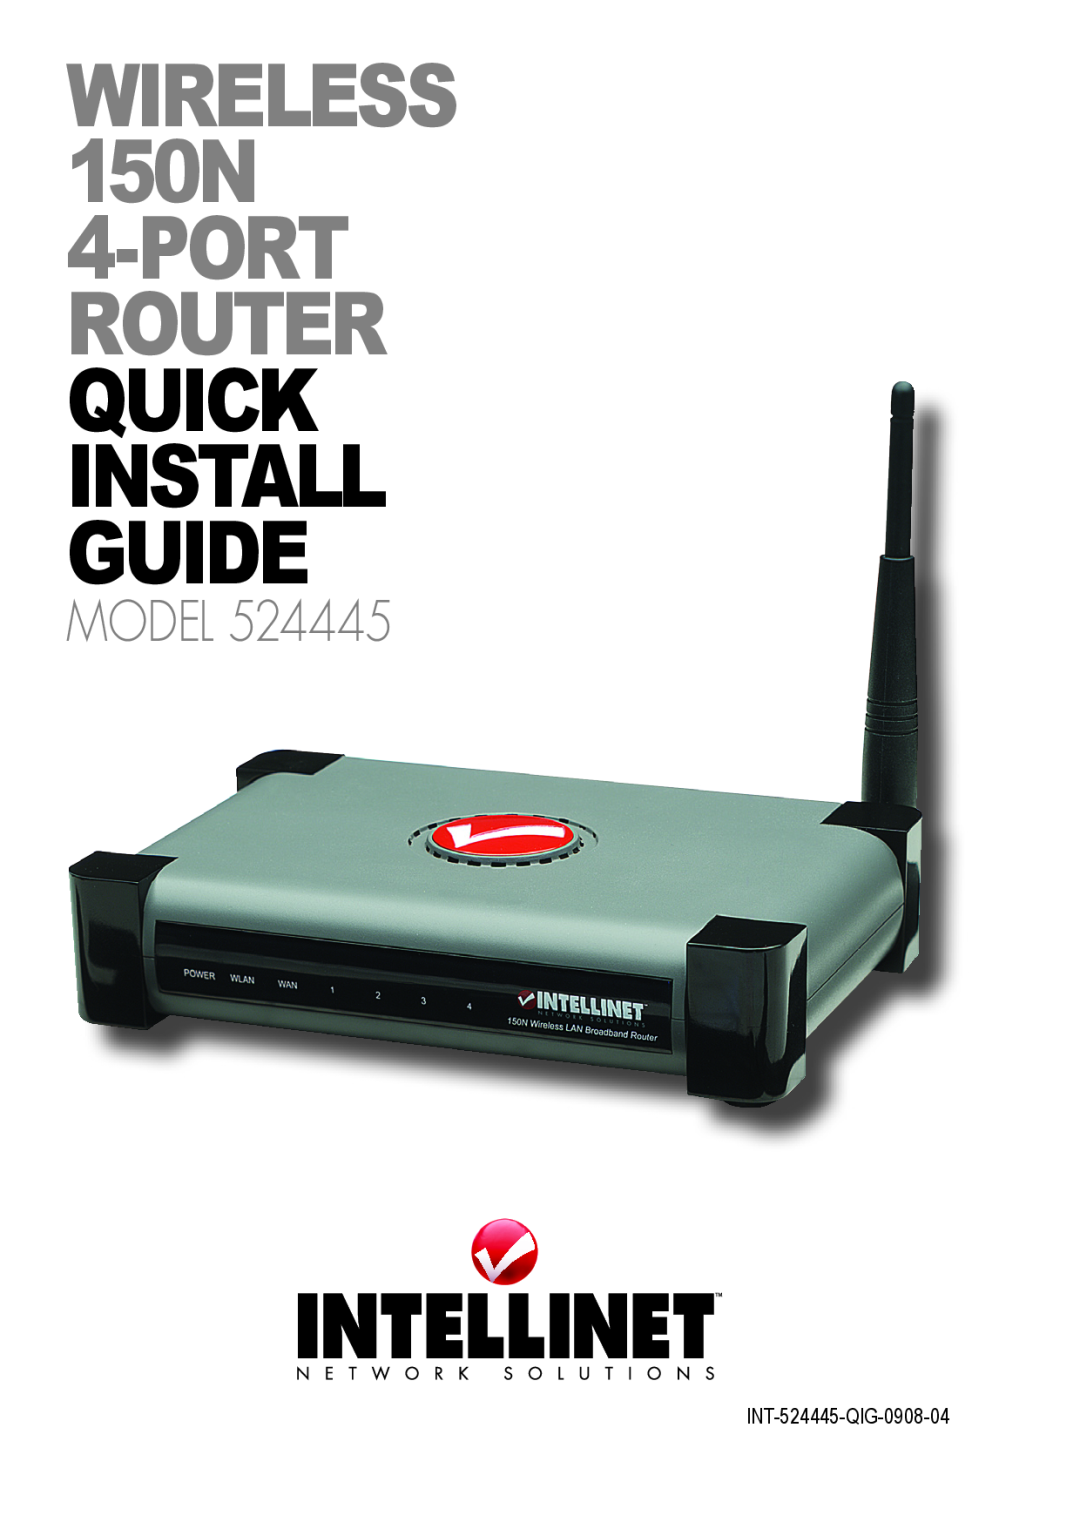 Intellinet Network Solutions manual Wireless 150N 4-Port Router quick install guide, Model, INT-524445-QIG-0908-04 